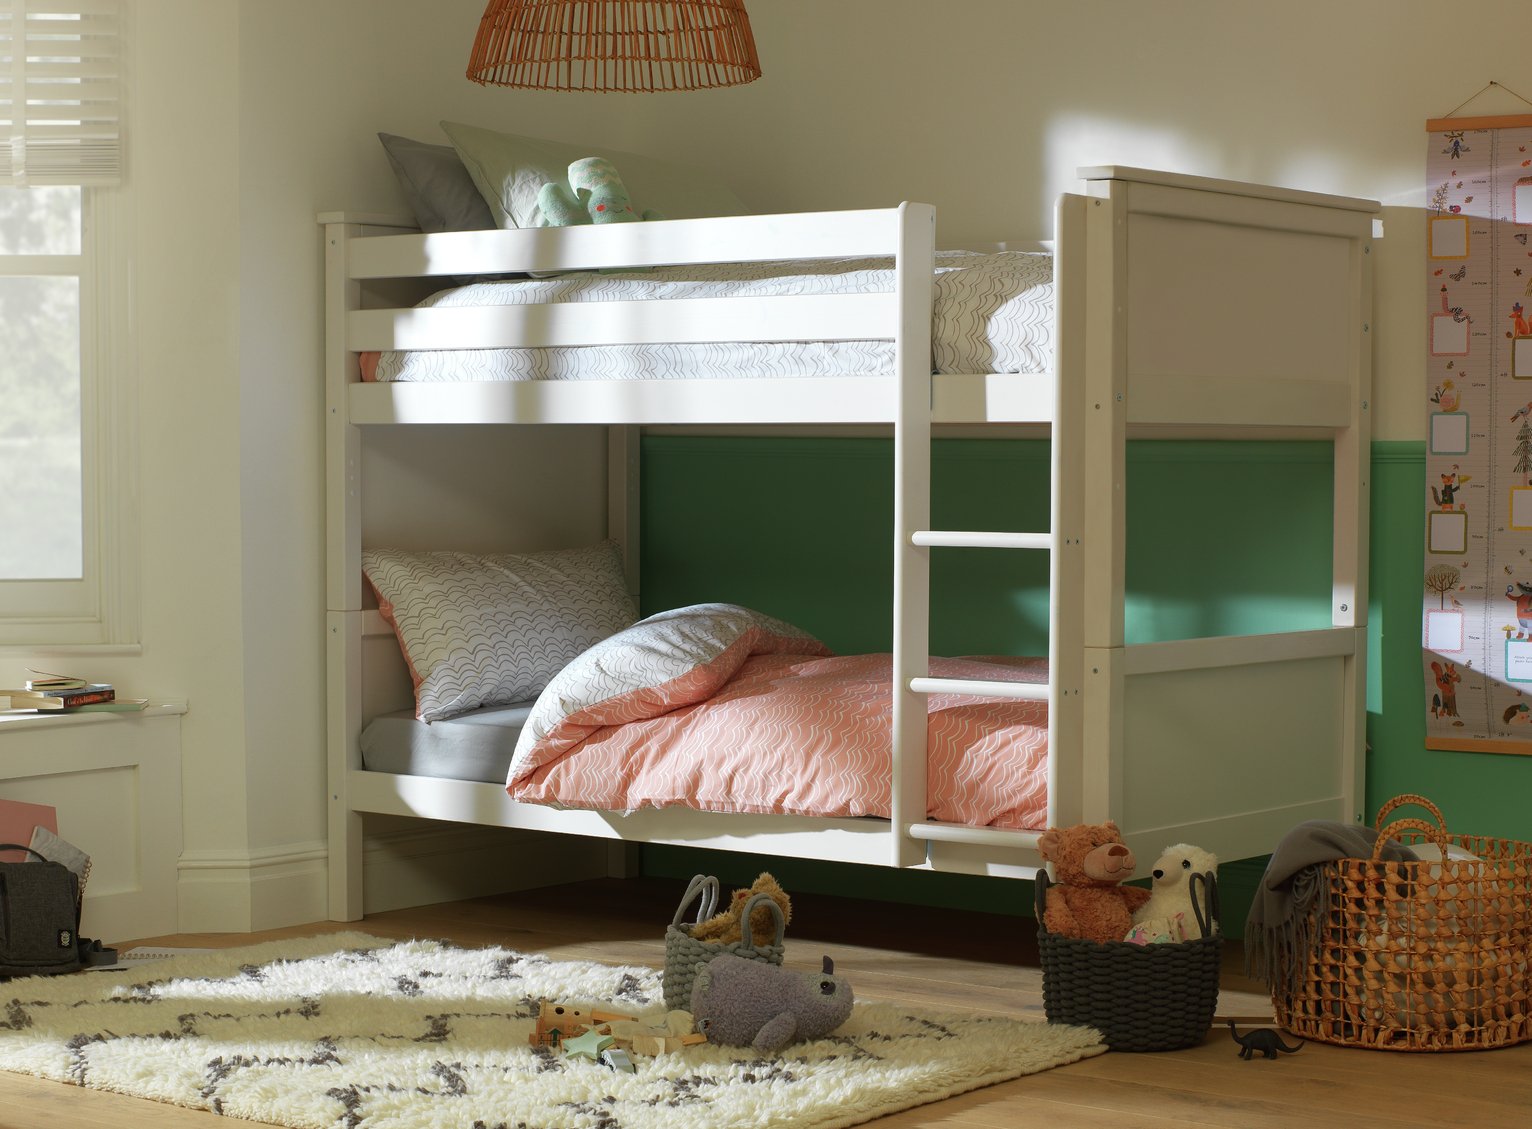 Argos Home Brooklyn Bunk Bed, Drawer & 2 Mattresses Review